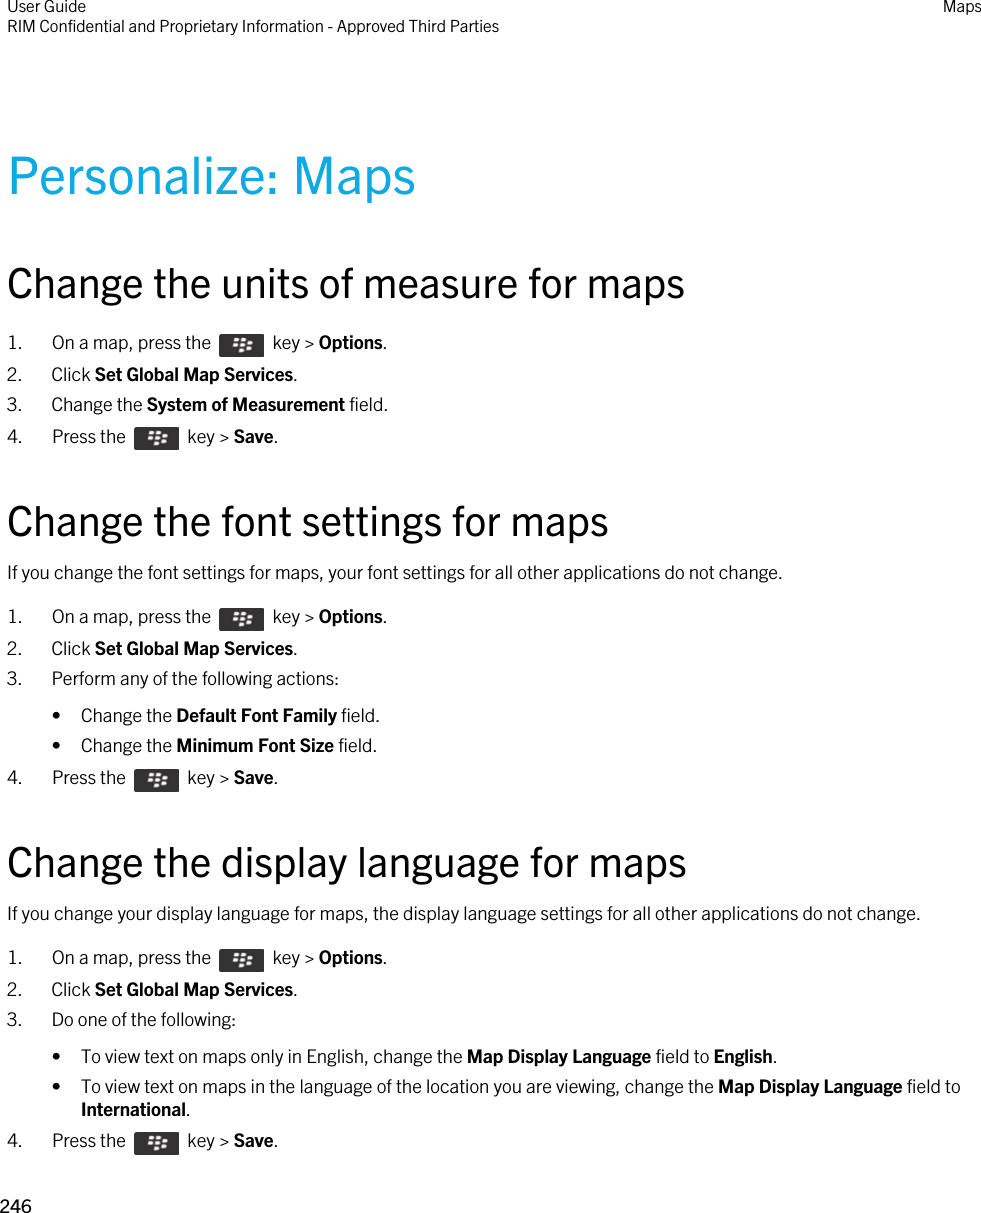 Personalize: MapsChange the units of measure for maps1.  On a map, press the    key &gt; Options.2. Click Set Global Map Services.3. Change the System of Measurement field.4.  Press the    key &gt; Save. Change the font settings for mapsIf you change the font settings for maps, your font settings for all other applications do not change.1.  On a map, press the    key &gt; Options.2. Click Set Global Map Services.3. Perform any of the following actions:• Change the Default Font Family field.• Change the Minimum Font Size field.4.  Press the    key &gt; Save. Change the display language for mapsIf you change your display language for maps, the display language settings for all other applications do not change.1.  On a map, press the    key &gt; Options.2. Click Set Global Map Services.3. Do one of the following:• To view text on maps only in English, change the Map Display Language field to English.• To view text on maps in the language of the location you are viewing, change the Map Display Language field to International.4.  Press the    key &gt; Save. User GuideRIM Confidential and Proprietary Information - Approved Third Parties Maps246 